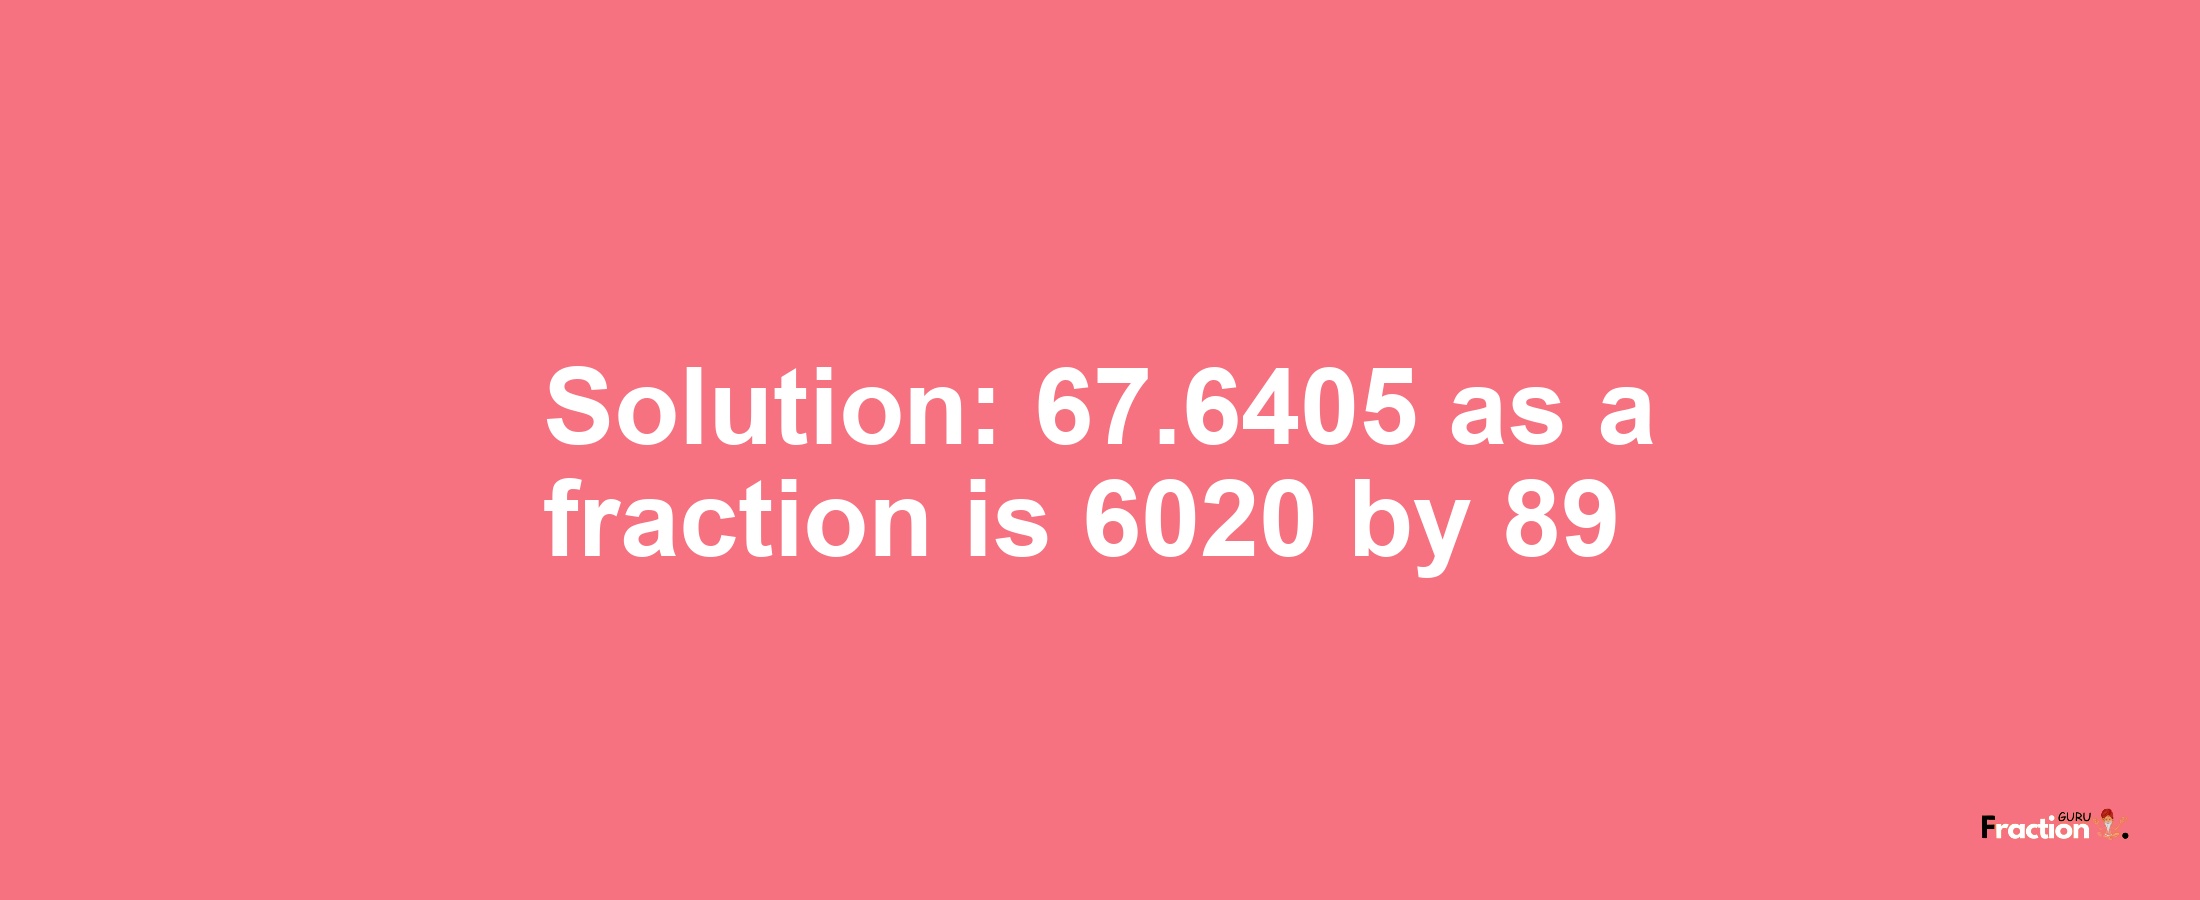 Solution:67.6405 as a fraction is 6020/89